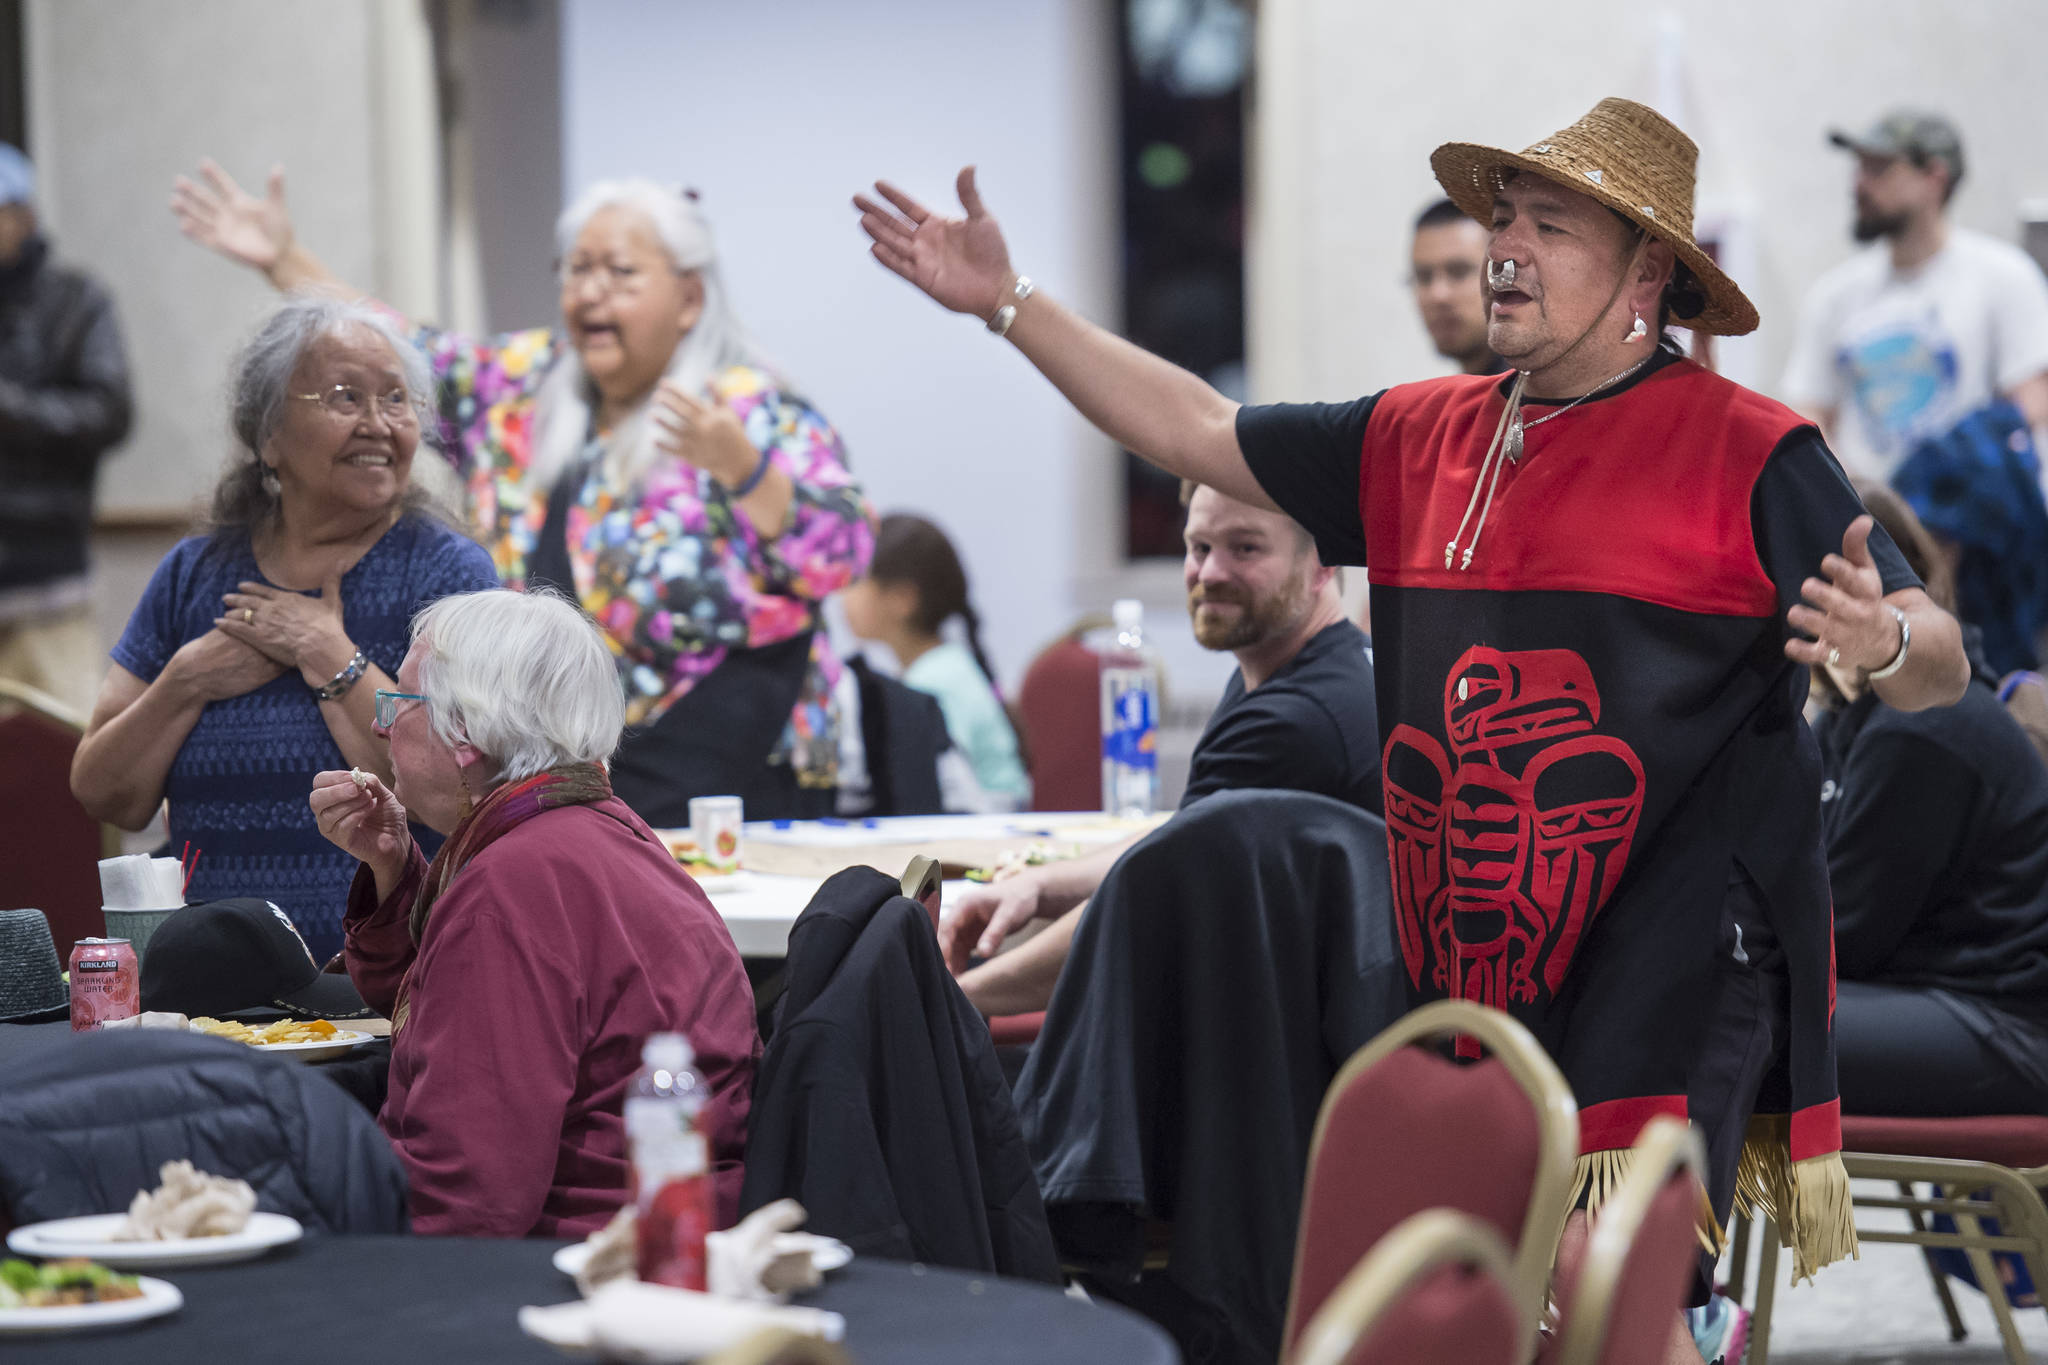 Lillian Hillman, left, watches as Woosh.ji.een Dance Group dancer John Garcia performs during a Celebrate Survivors gathering sponsored by Central Council Tlingit and Haida Indian Tribes of Alaska and AWARE in the Elizabeth Peratrovich Hall on Tuesday, Oct. 23, 2018. October is Domestic Violence Awareness Month. (Michael Penn | Juneau Empire)